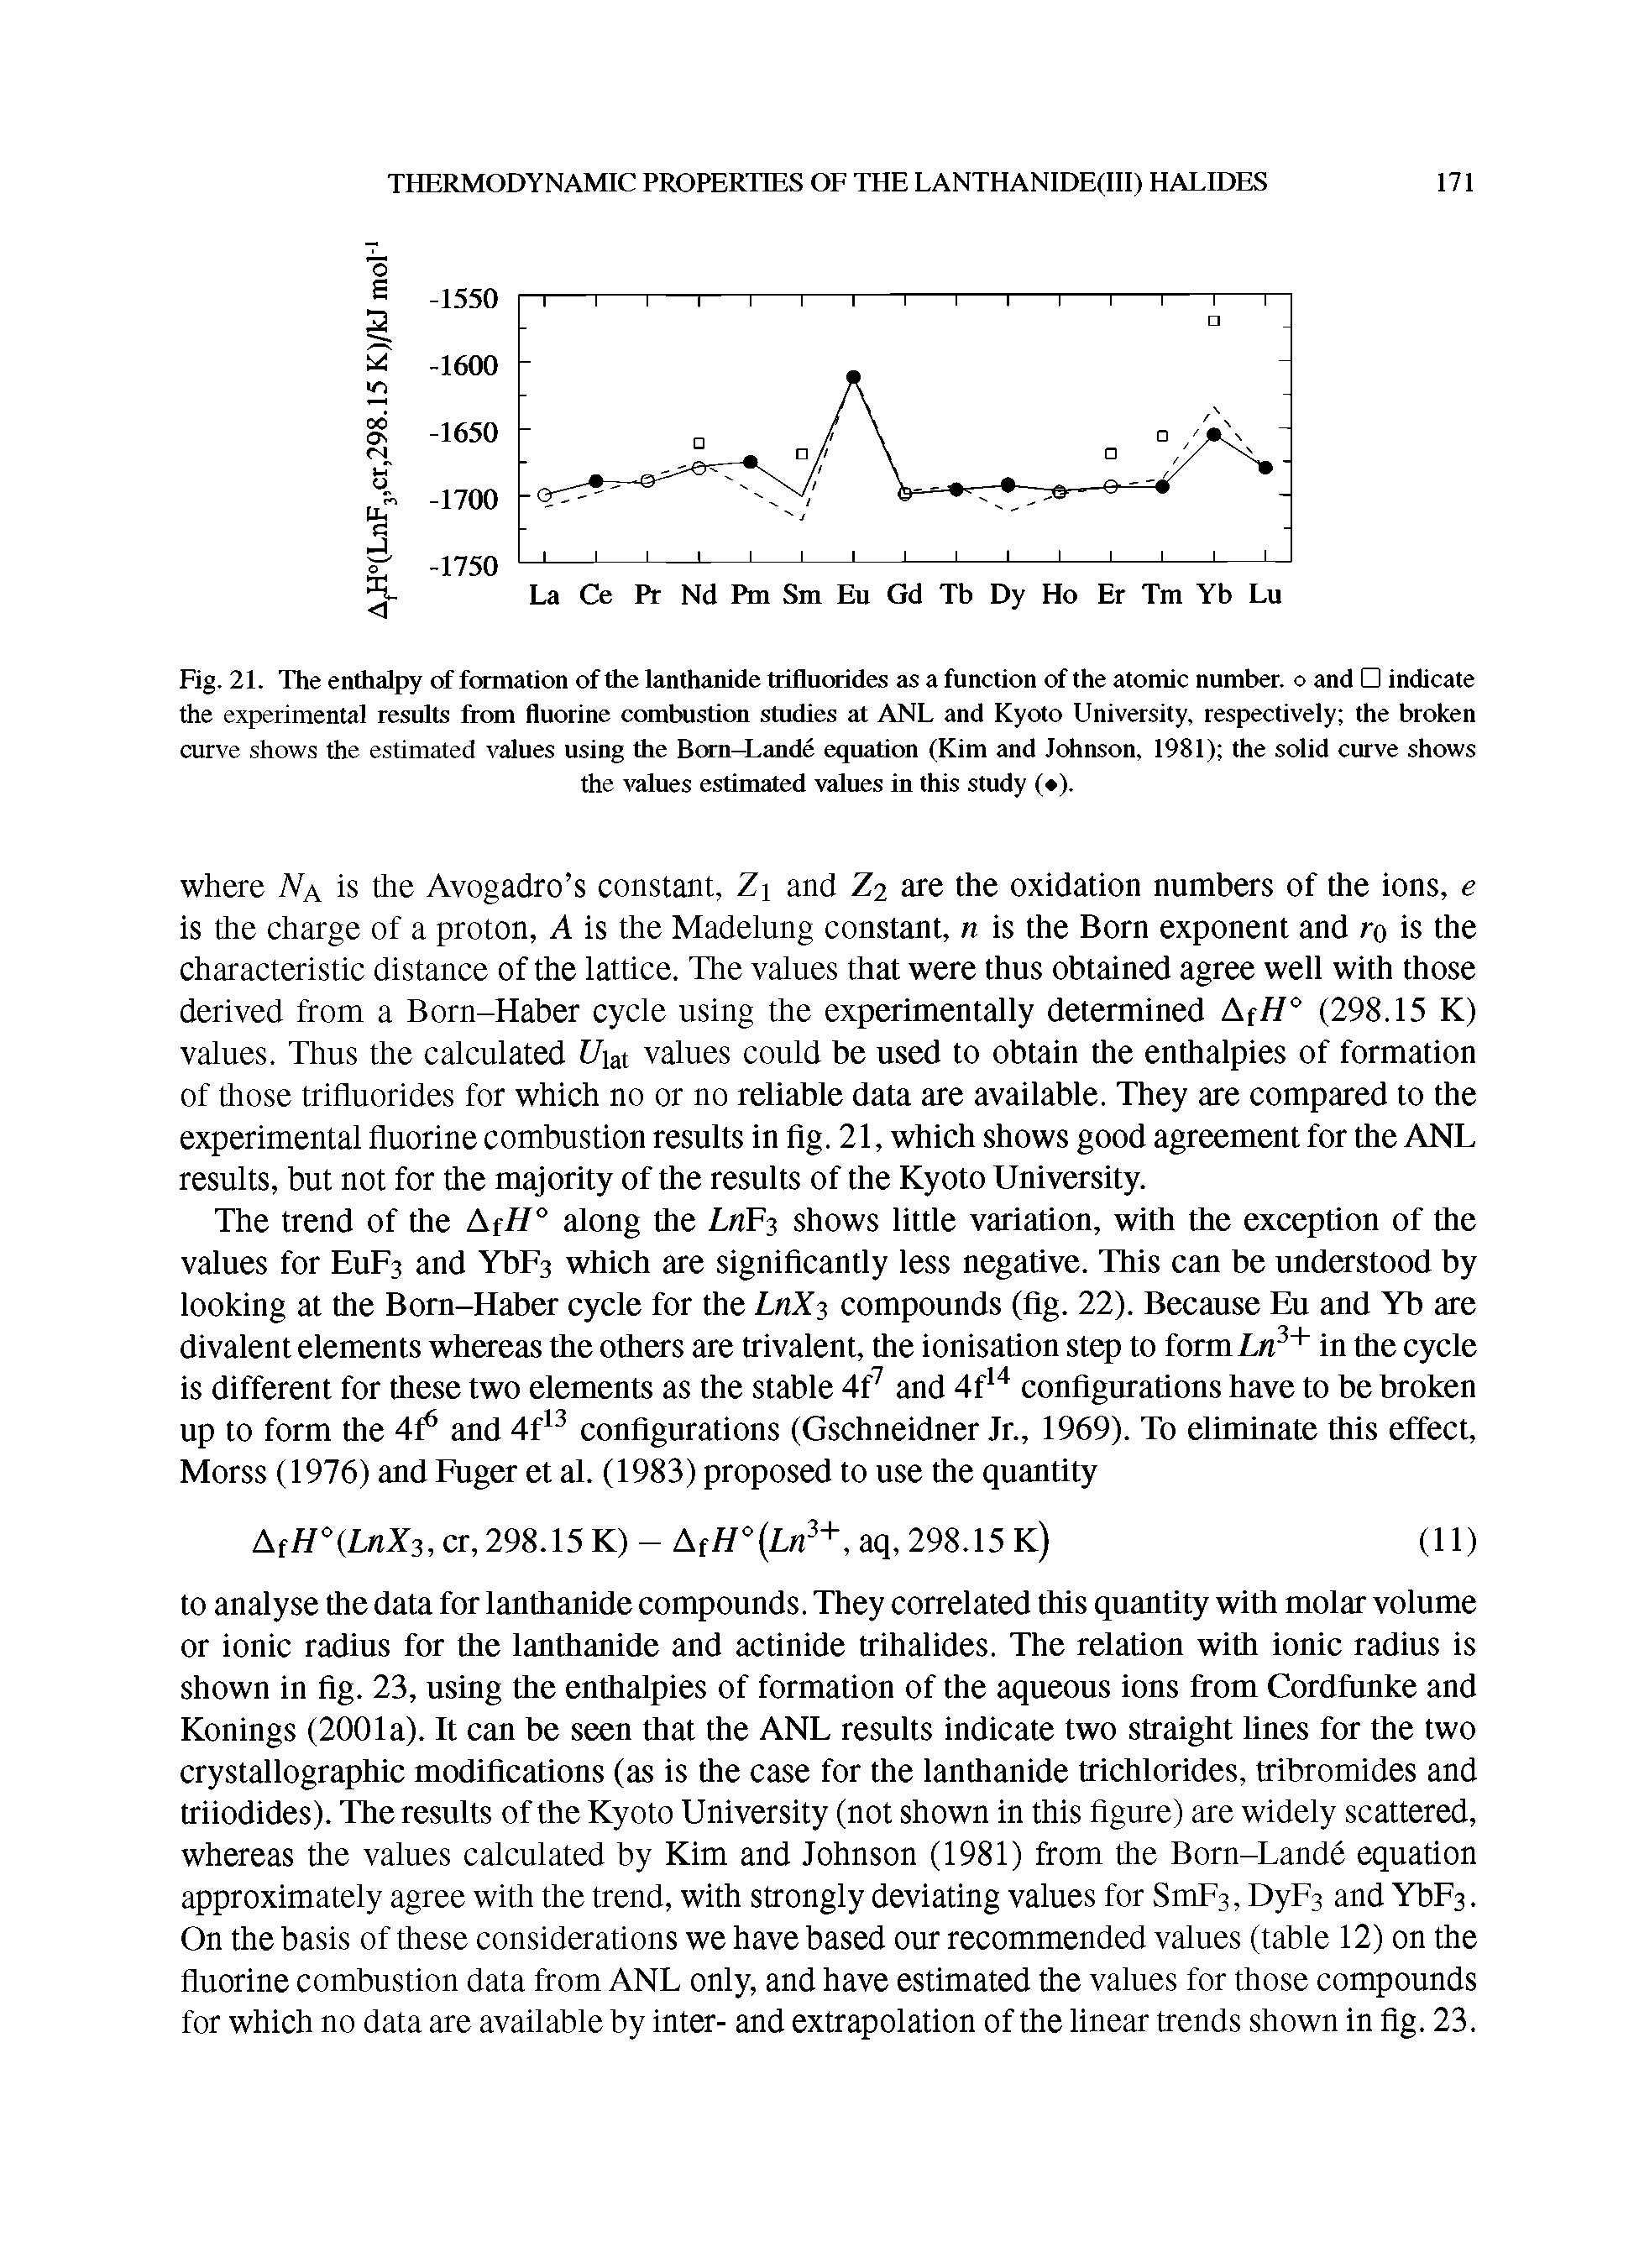 Fig. 21. The enthalpy of formation of the lanthanide trilluorides as a function of the atomic number, o and indicate the experimental results from fluorine combustion studies at ANL and Kyoto University, respectively the broken curve shows the estimated values using the Bom-Lande equation (Kim and lohnson, 1981) the solid curve shows...